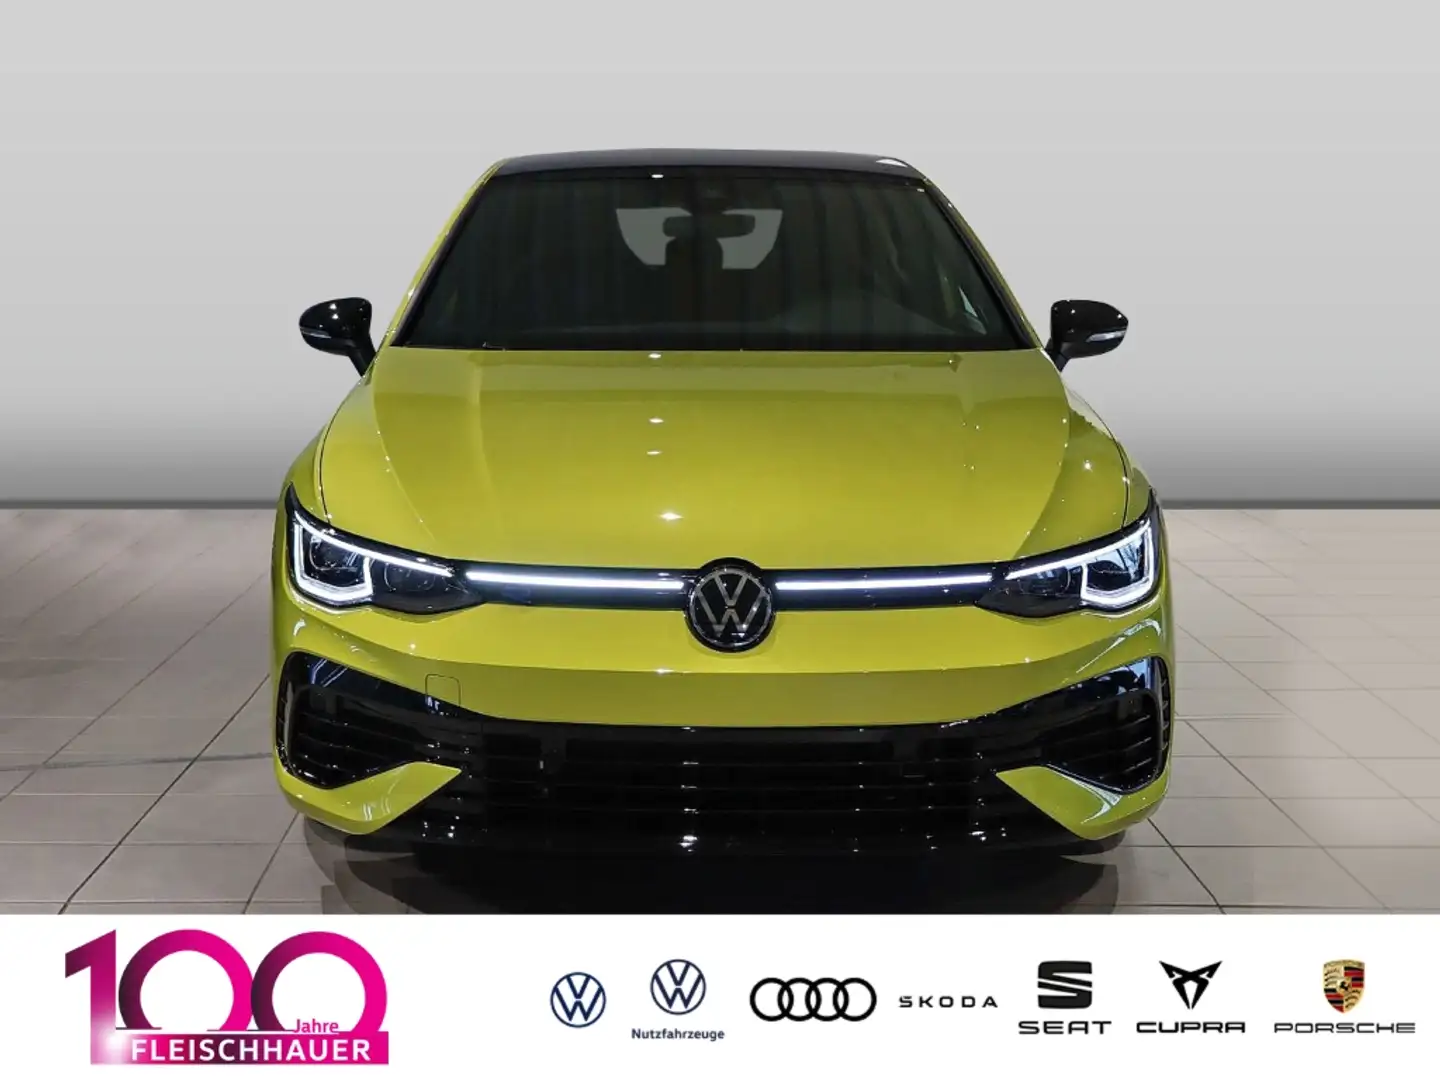 Volkswagen Golf R 2.0 TSI Performance 333 Limited Edition 4Motion Yellow - 2